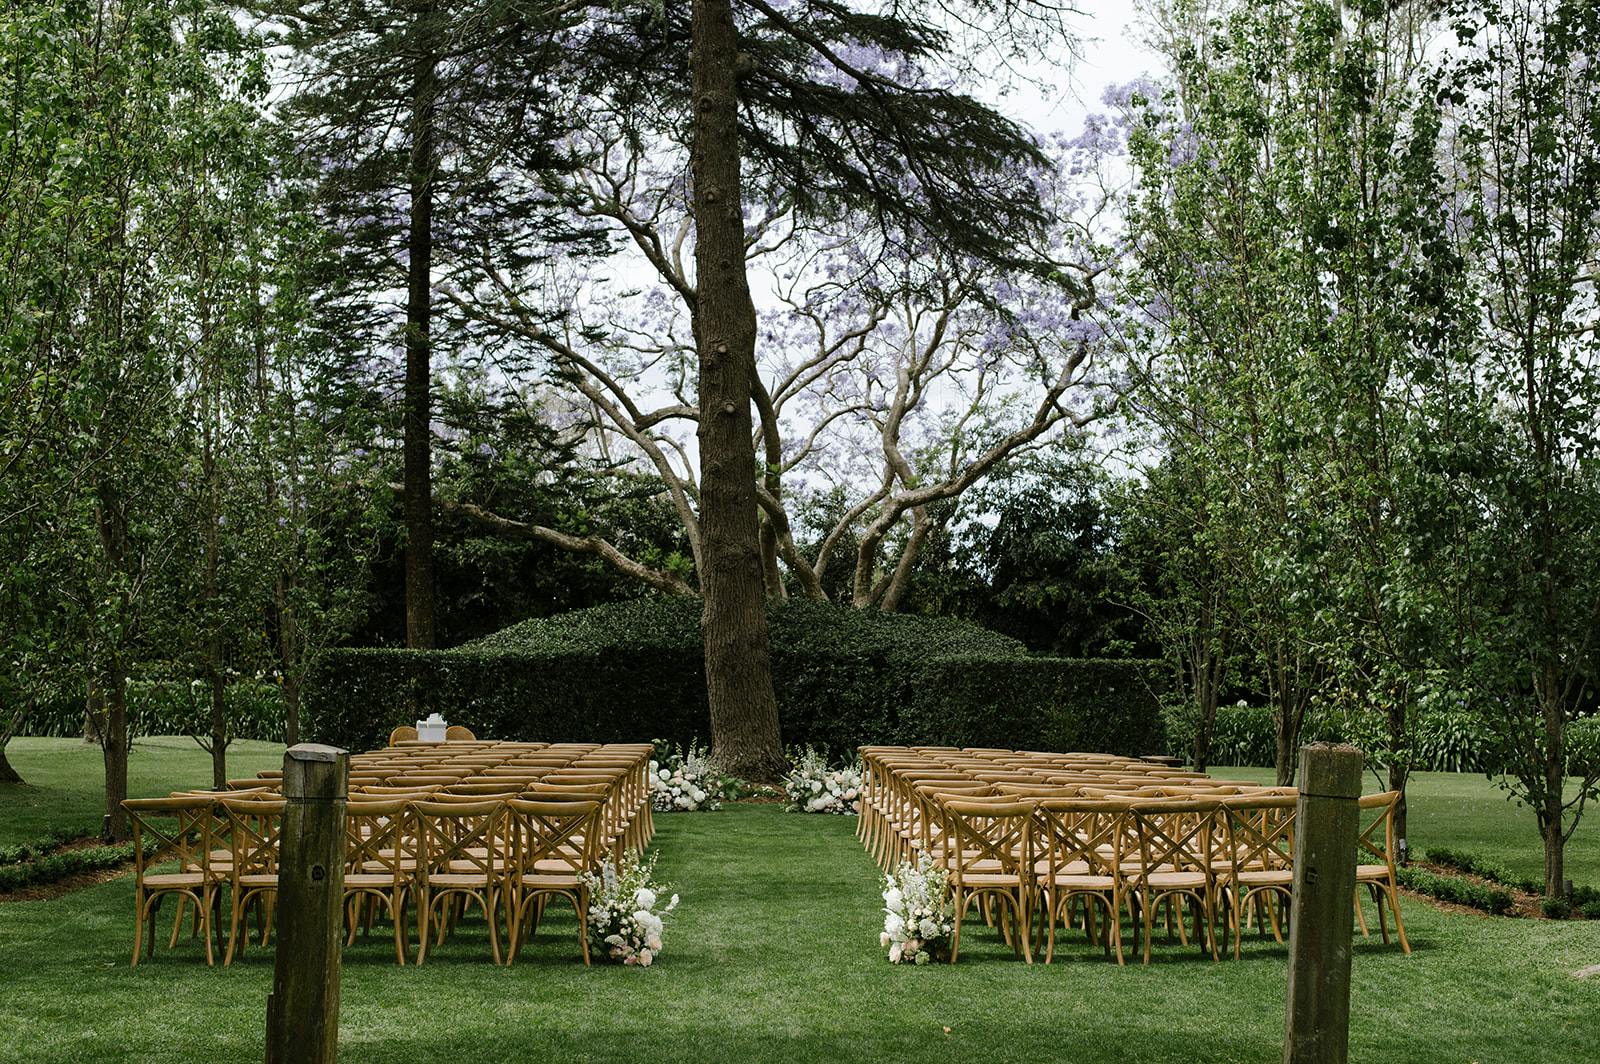 A serene outdoor wedding setup on a lush green lawn. Rows of wooden chairs with floral arrangements on the aisle line a path leading to a large tree at the altar. The area is surrounded by tall trees and greenery, creating an intimate and natural setting.